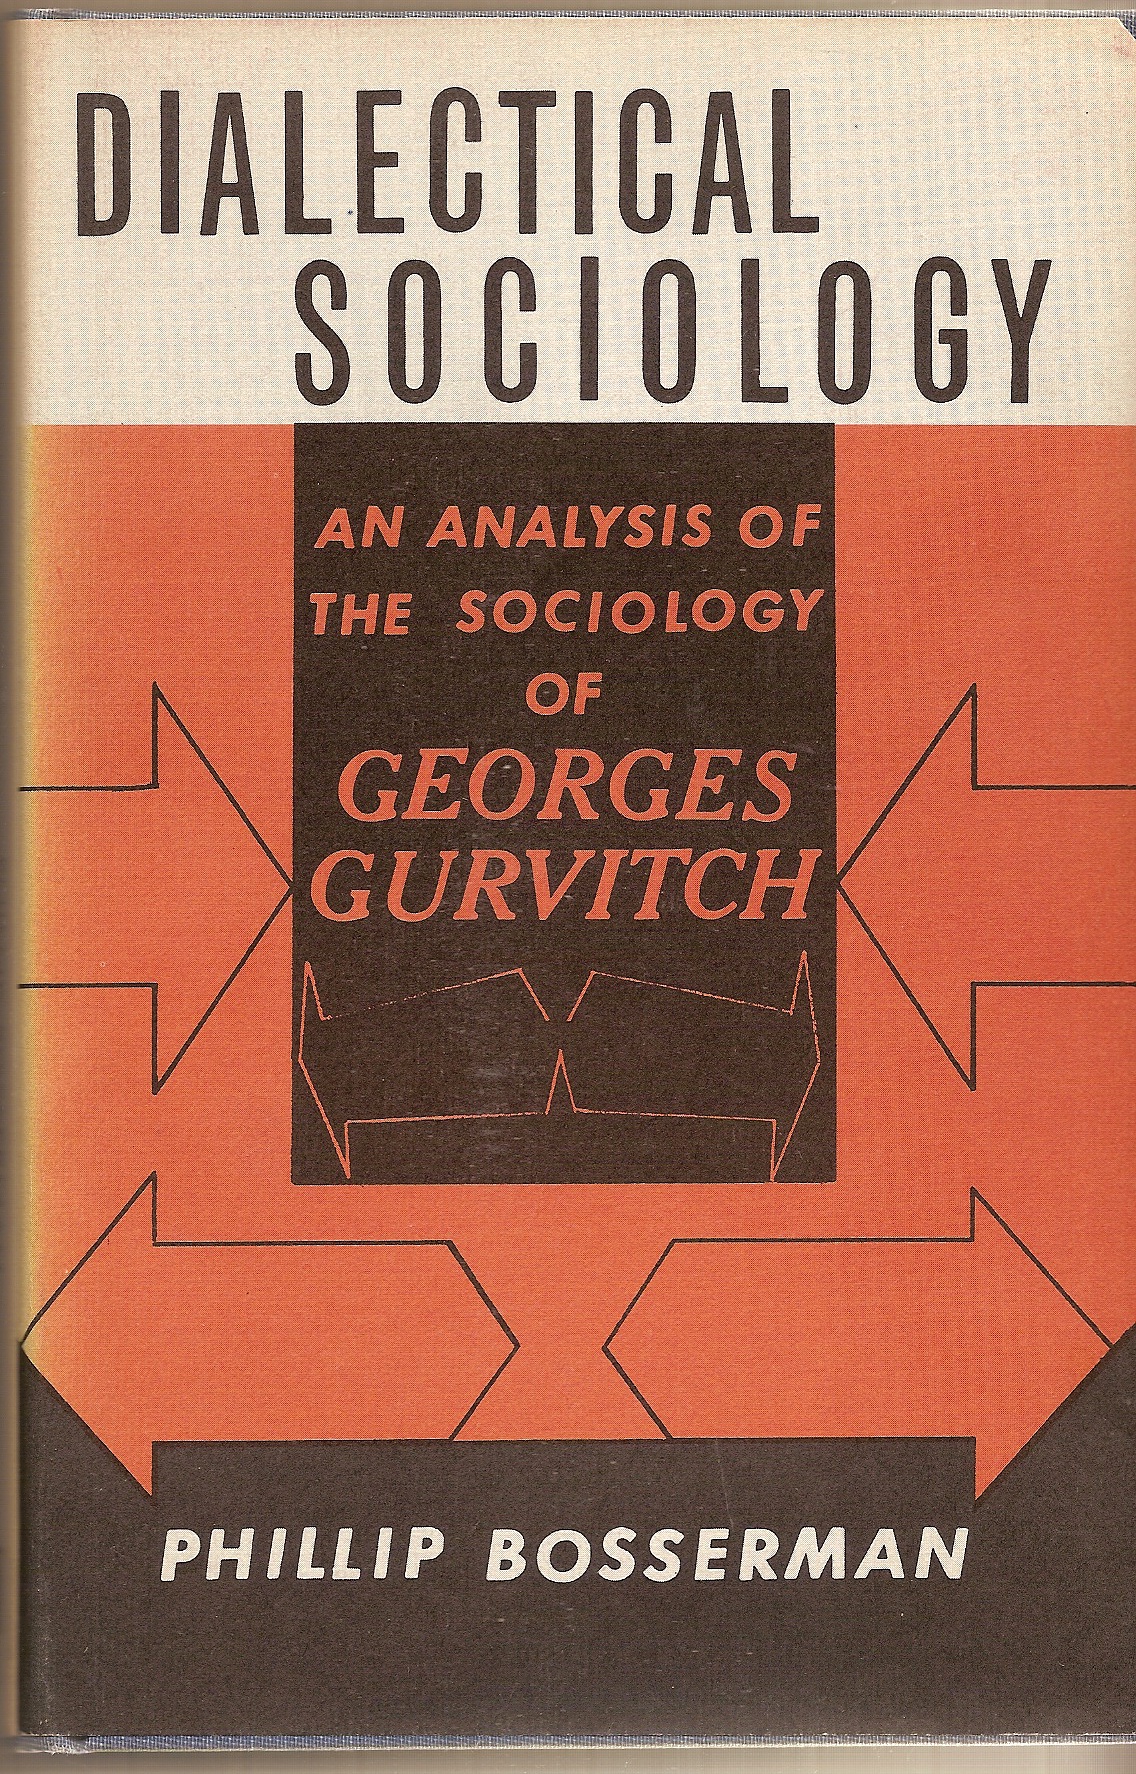 BOSSERMAN PHILLIP - Dialectical Sociology an Analysis of the Sociology of Georges Gurvitch